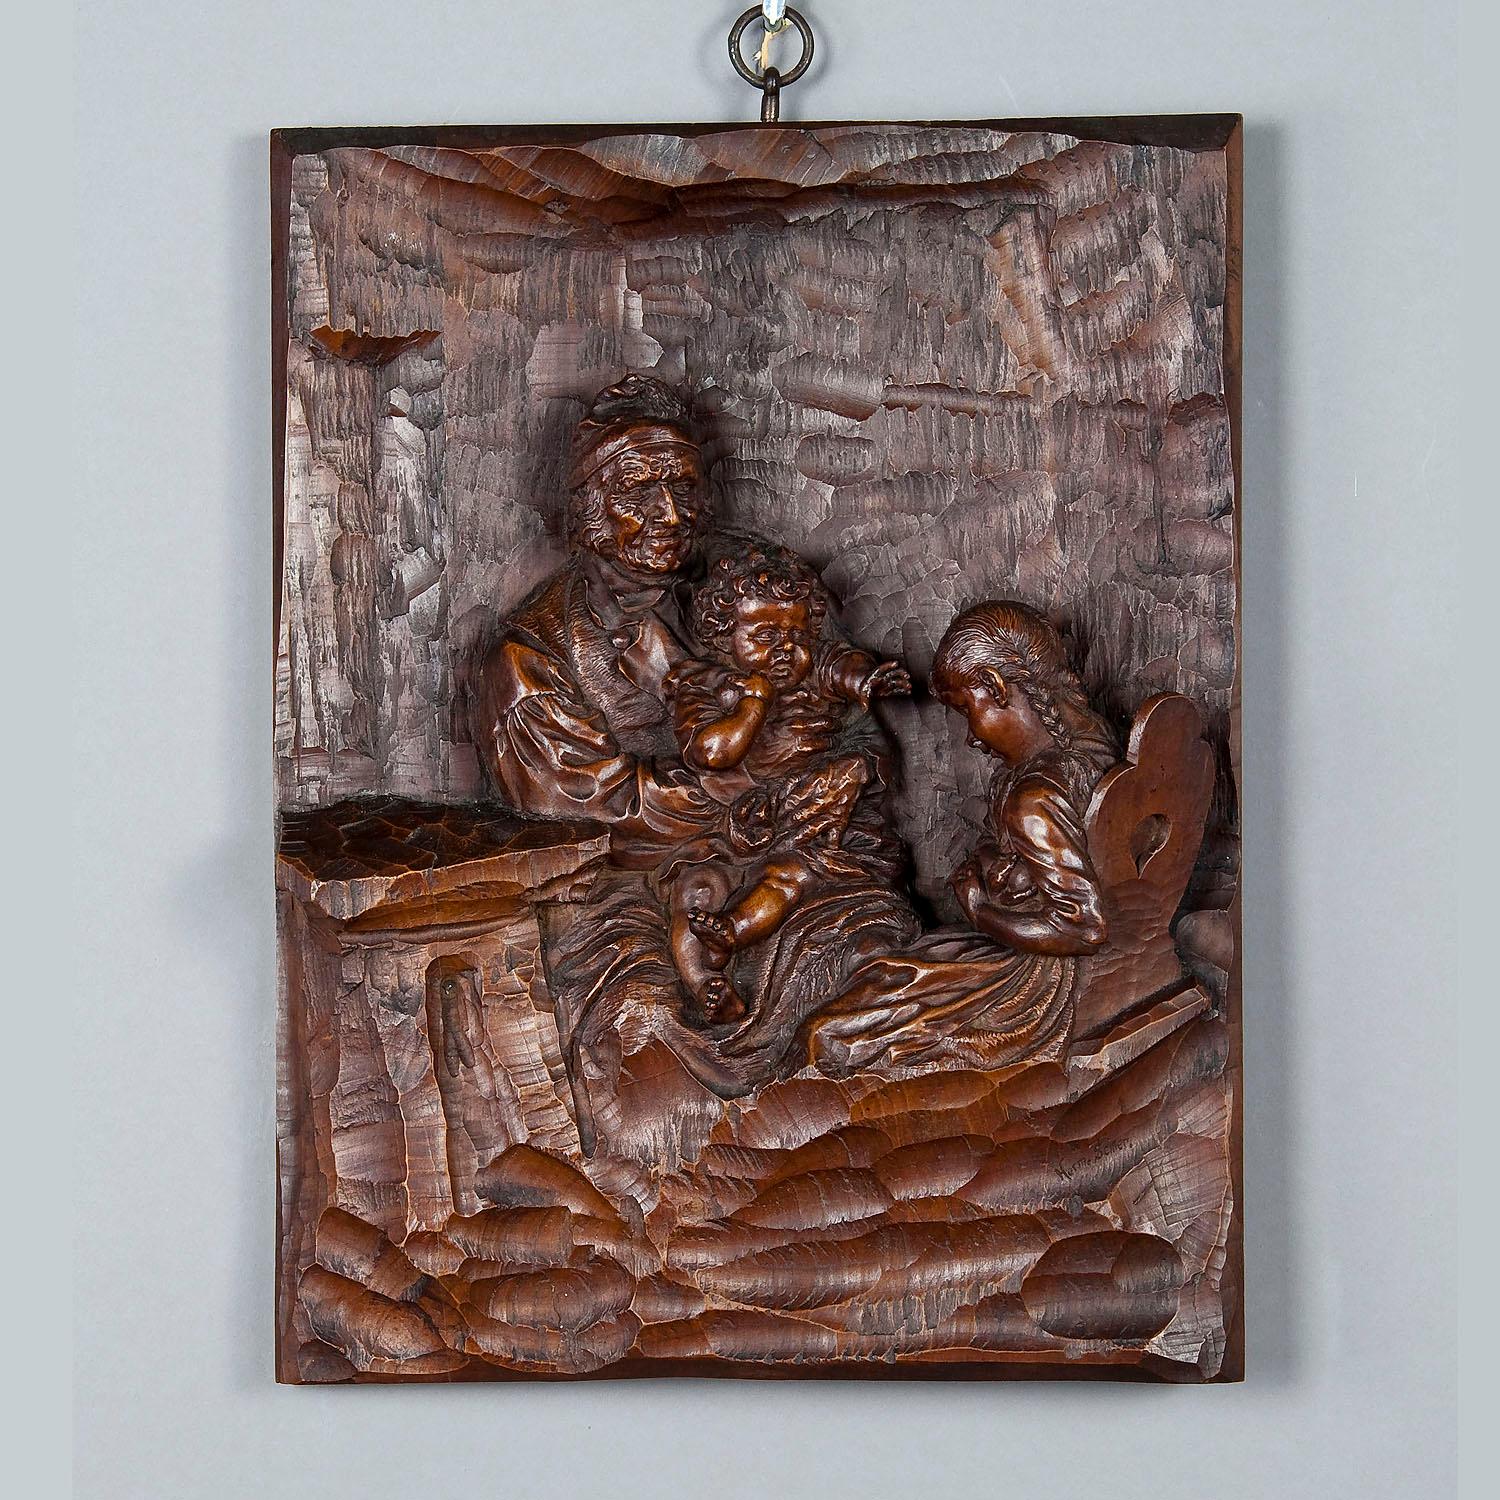 Relief Woodcarving by Hermann Steiner Meran 19th century

The wooden carved relief shows a grandfather with grandson on his lap. The granddaughter is sitting on the chair and hides a ball from her brother. Executed by the famous woodcarver Hermann